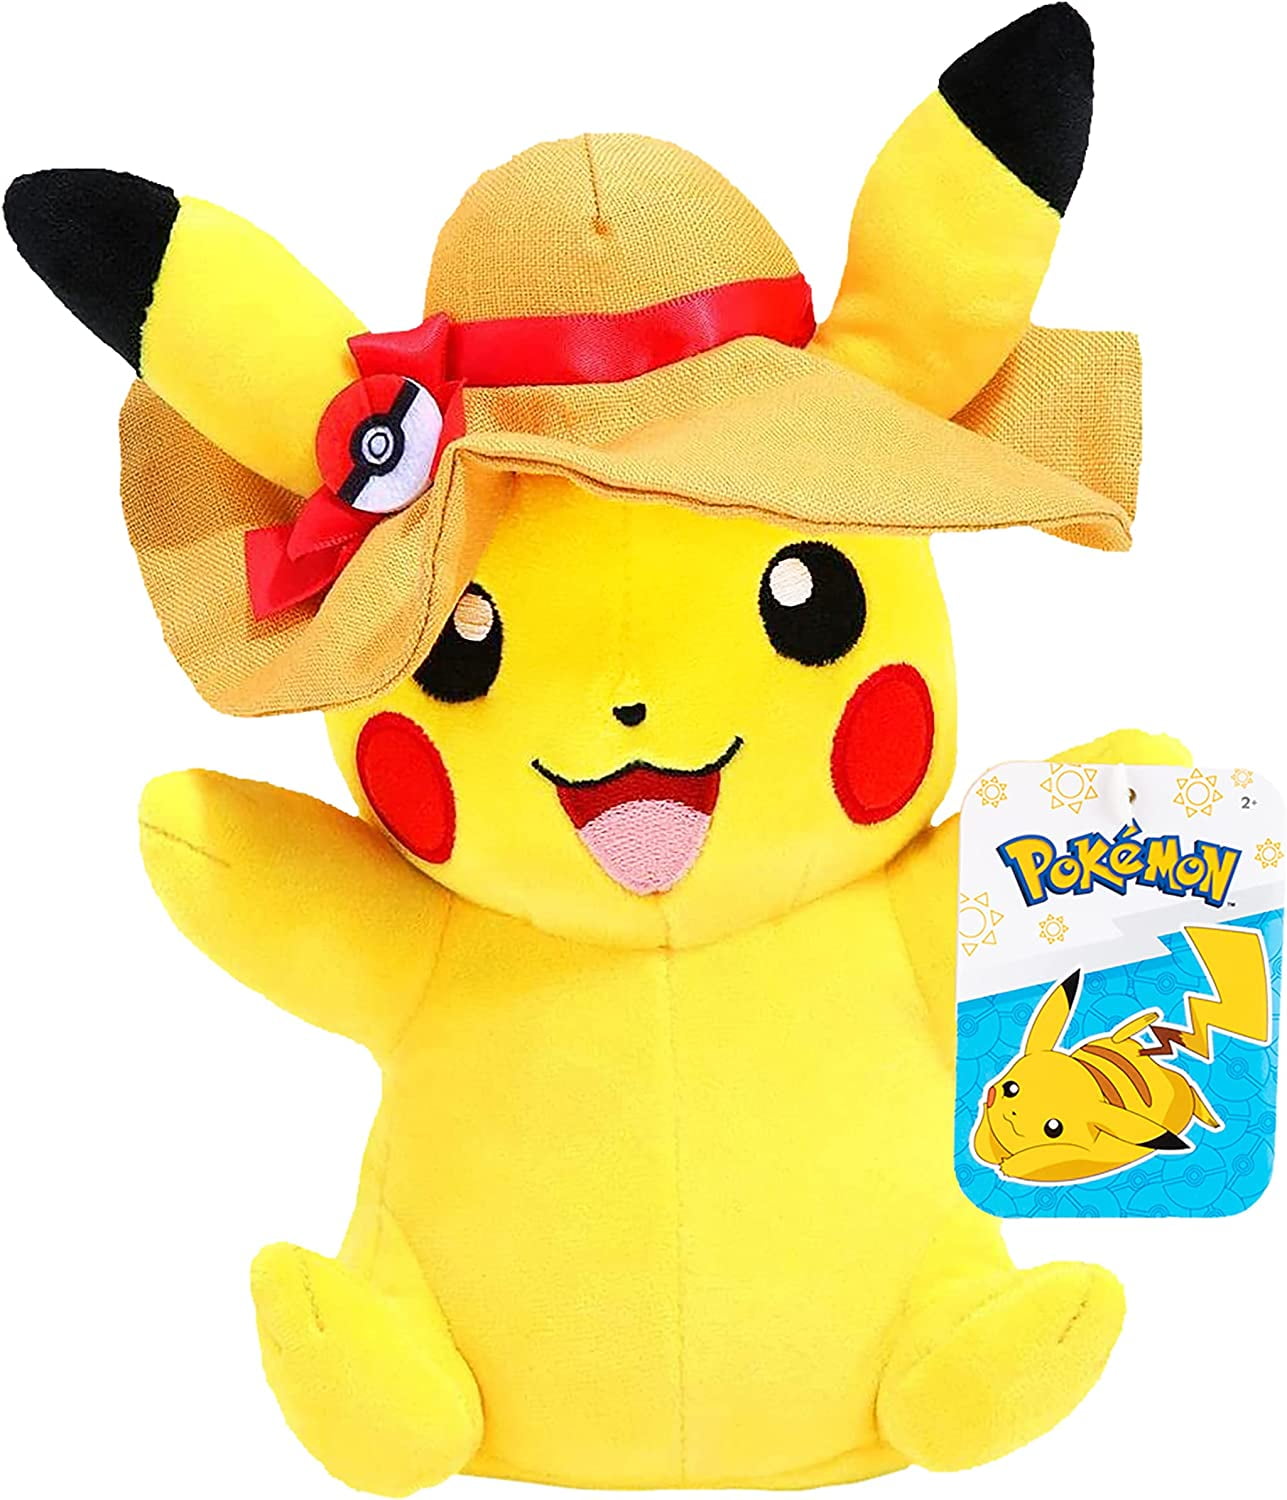  Pokémon 12 Large Eevee Plush - Officially Licensed - Quality &  Soft Stuffed Animal Toy - Let's Go Starter - Great Gift for Kids, Boys,  Girls & Fans of Pokemon : Toys & Games